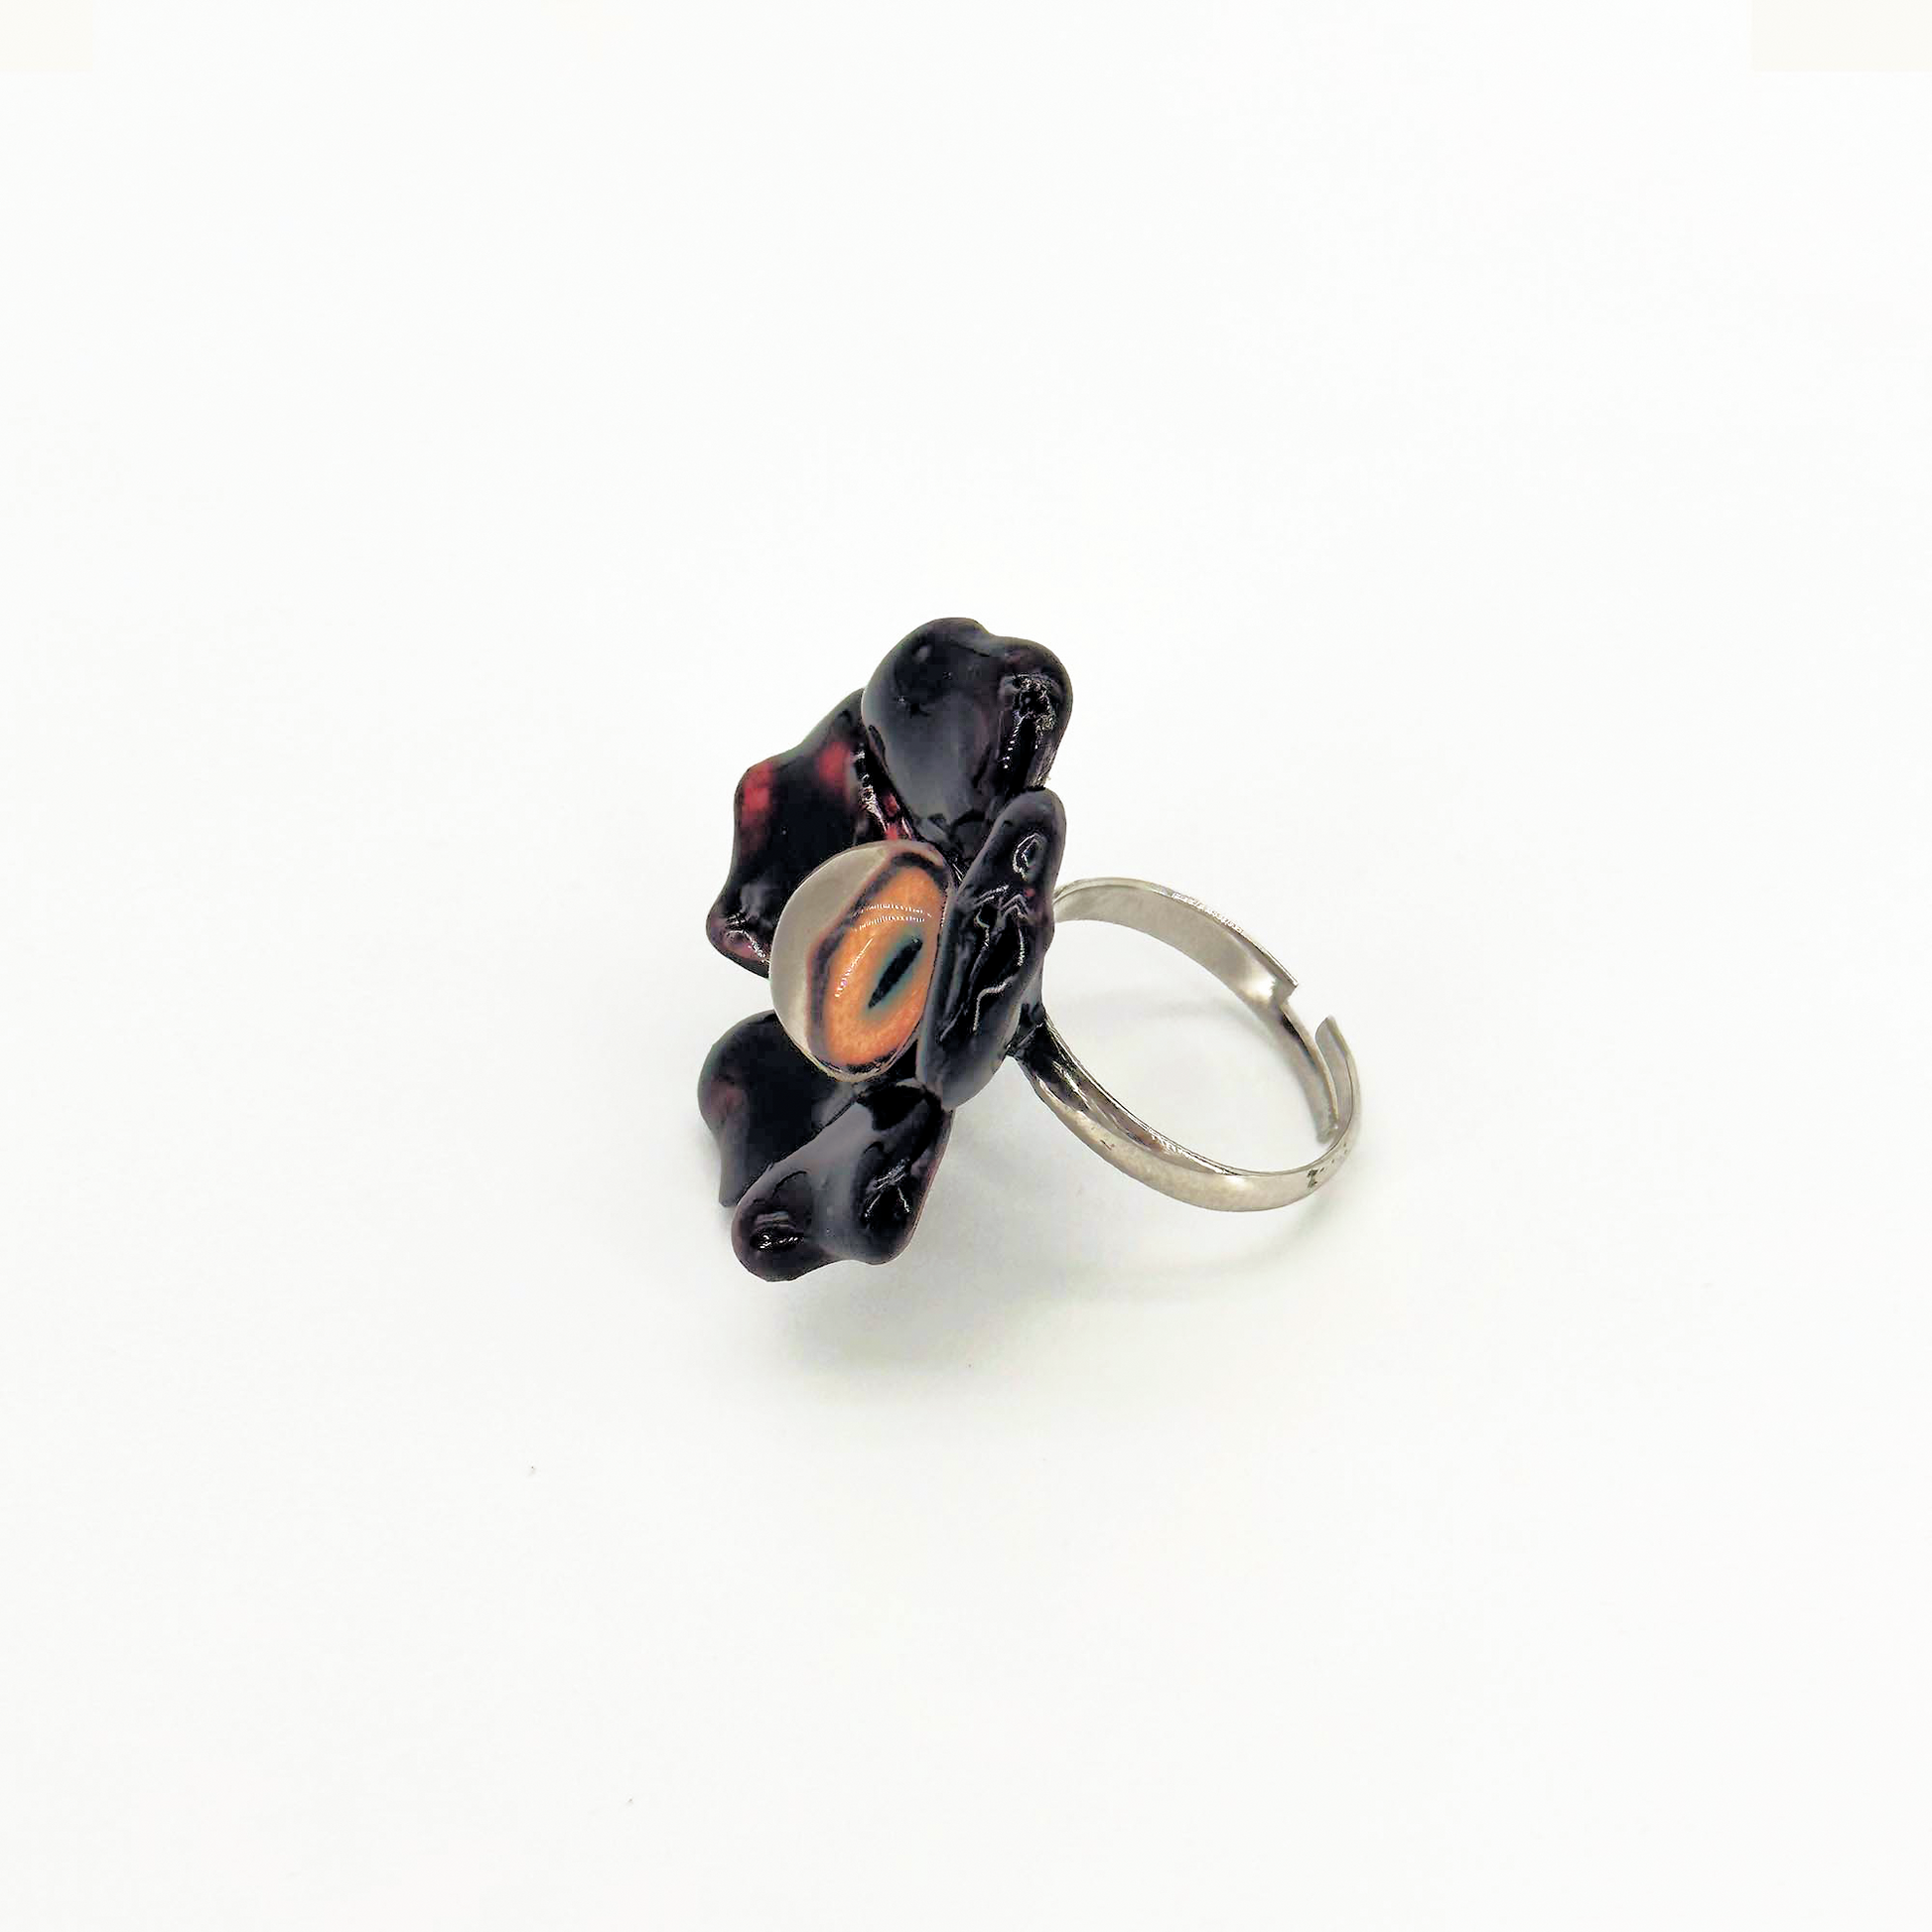 Side view of handmade ring with flower and eye elements